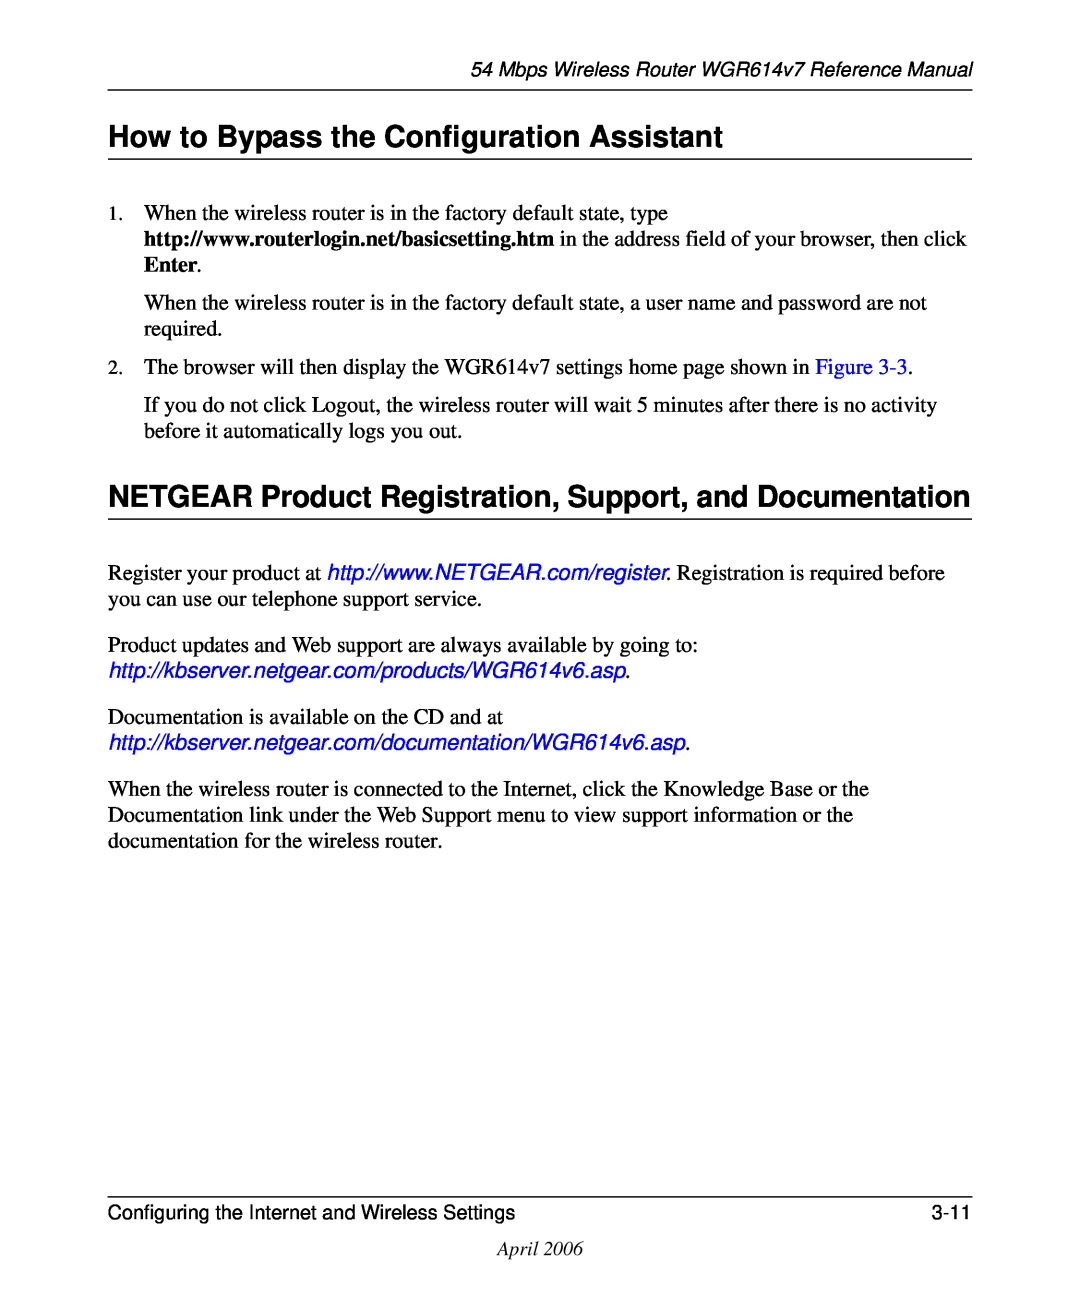 NETGEAR WGR614v7 manual How to Bypass the Configuration Assistant, NETGEAR Product Registration, Support, and Documentation 